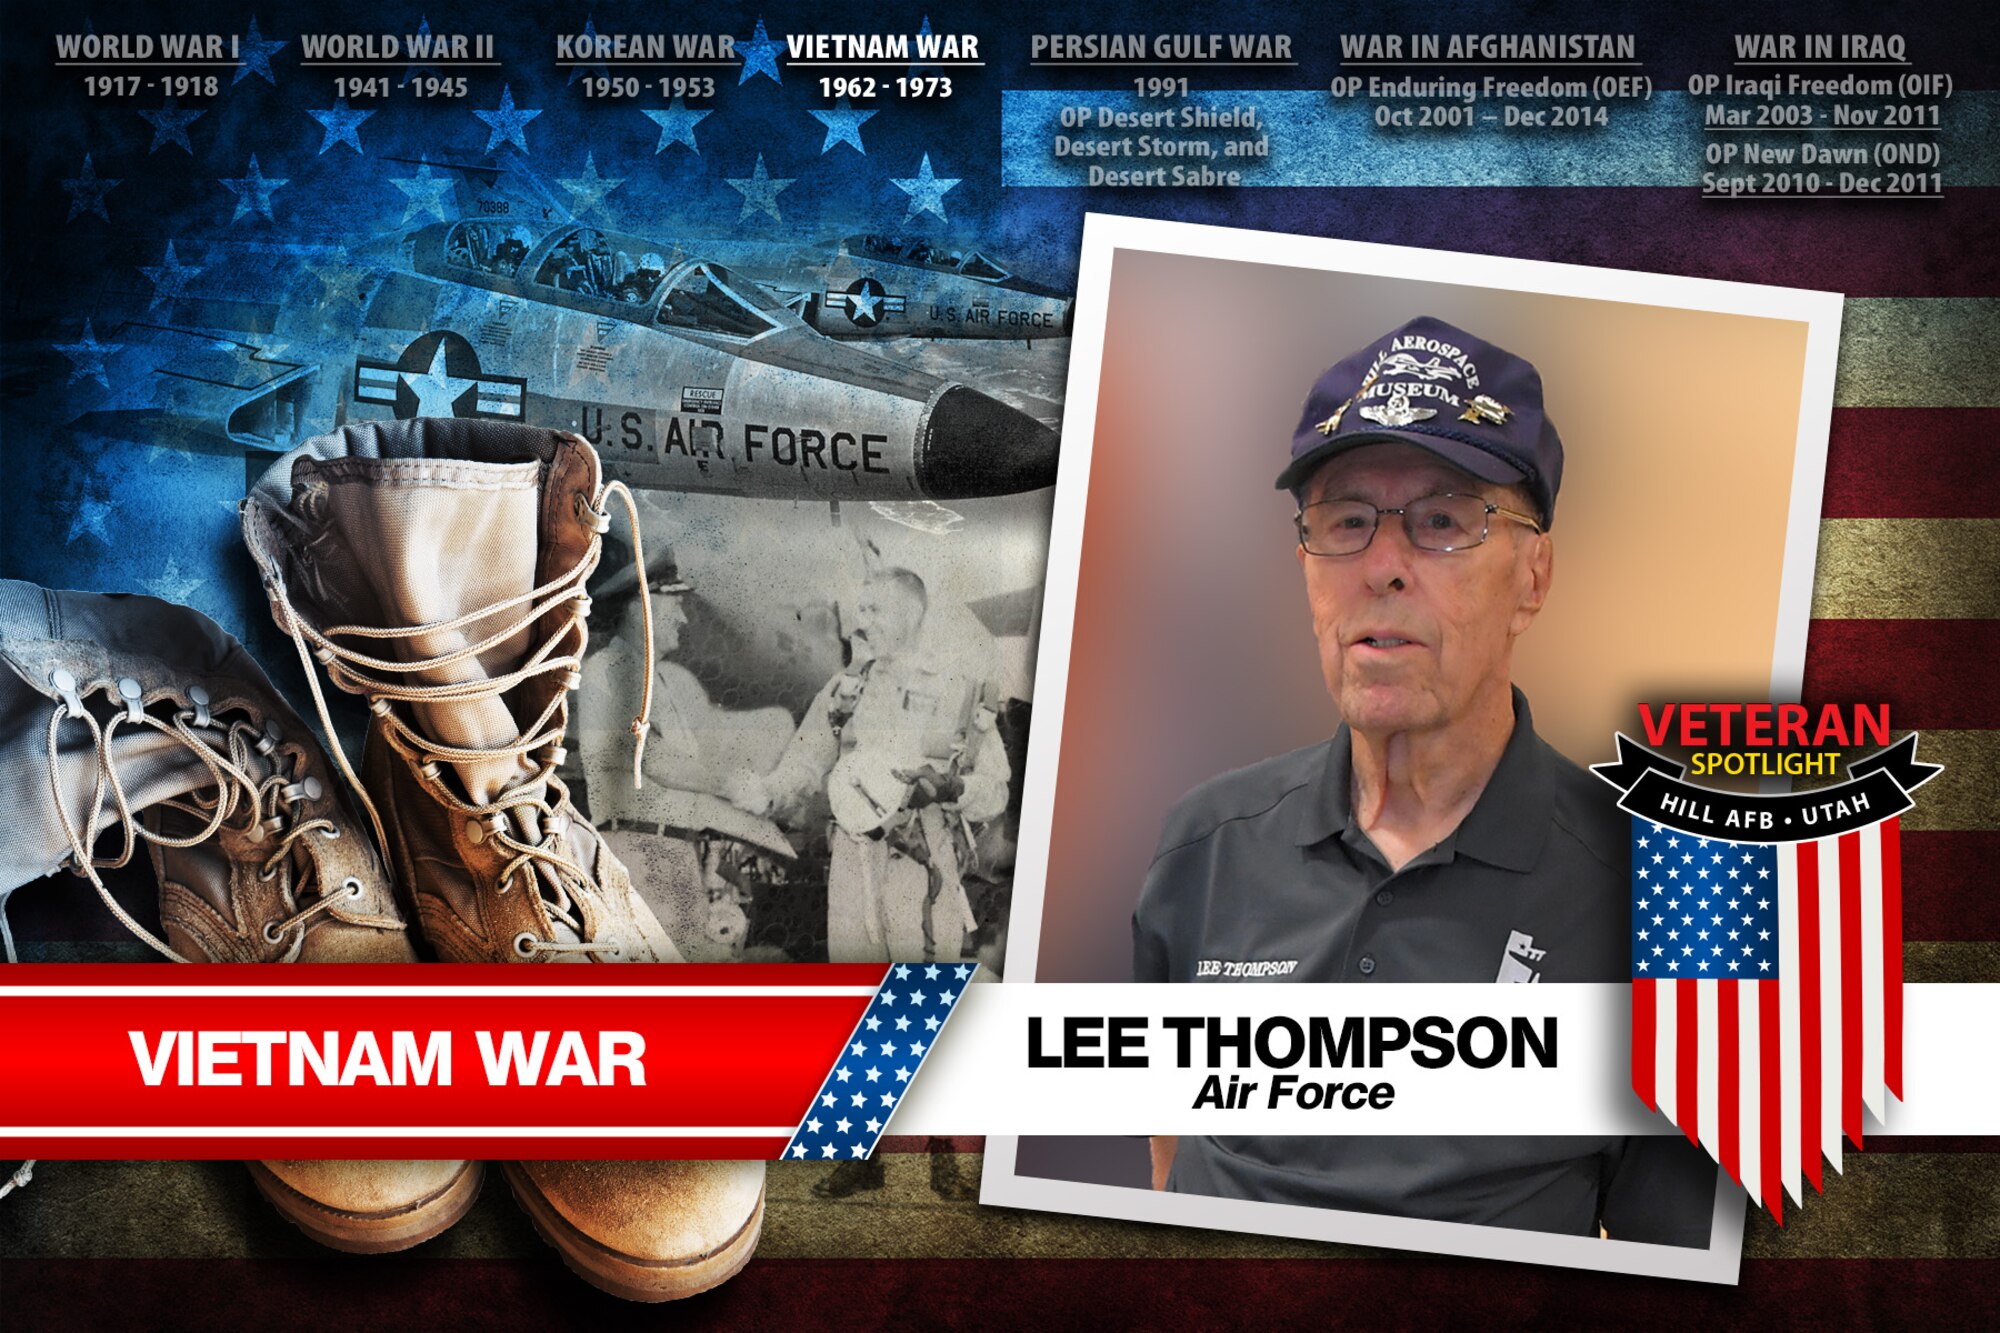 Today's spotlight is U.S. Air Force veteran Lee Thompson. (U.S. Air Force illustration by David Perry)